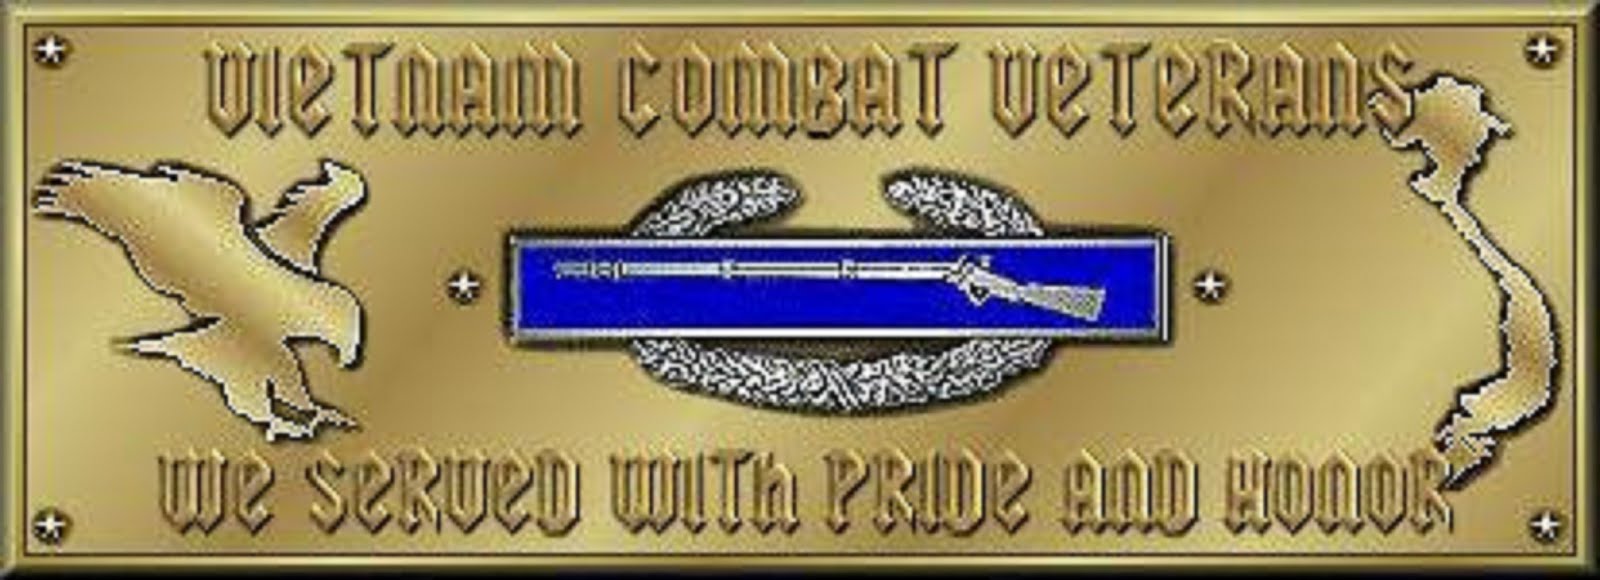 VIETNAM COMBAT VETERANS SERVED WITH PRIDE AND HONOR